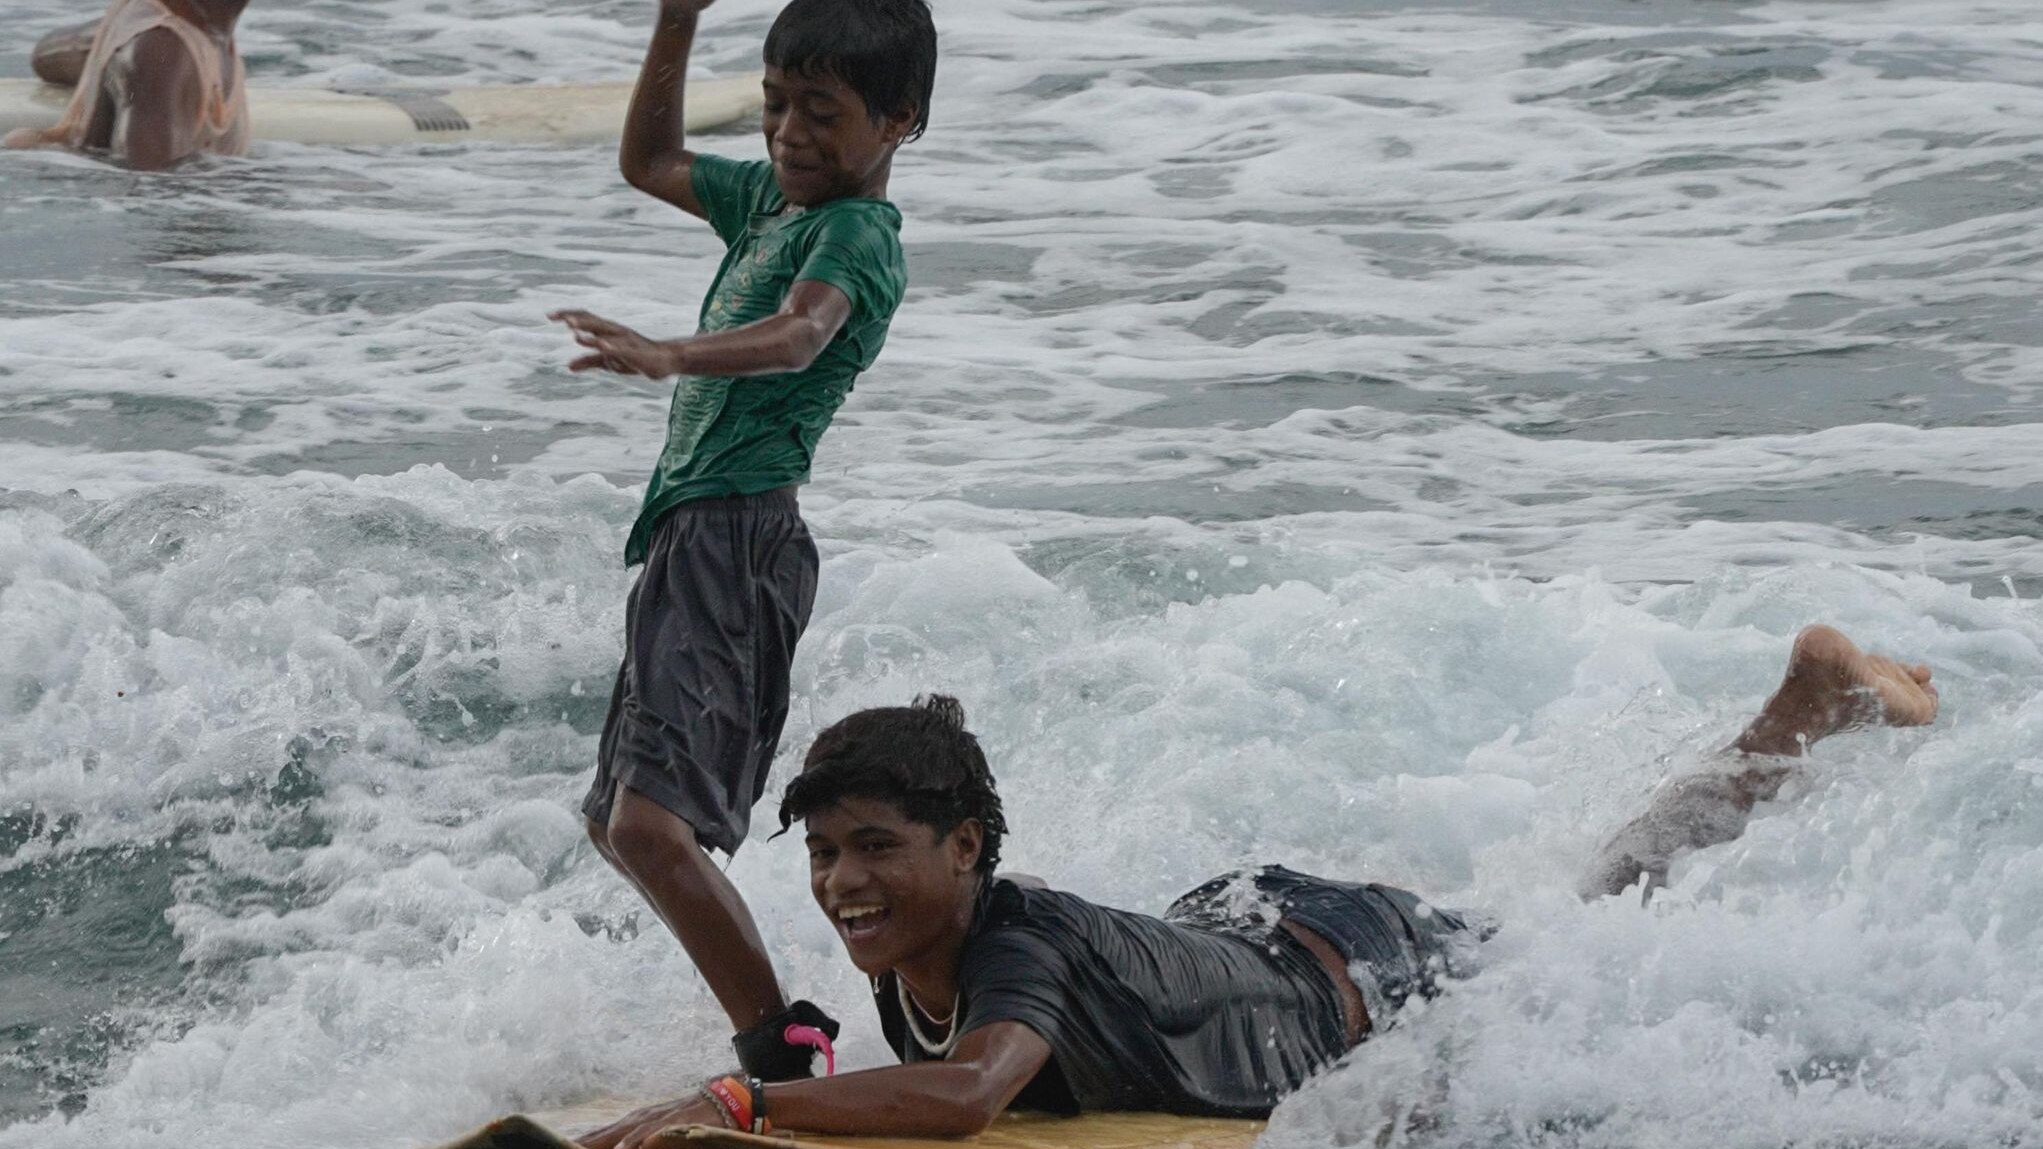 pre-loved surfboards donated to help inspire new wave of surfers in samoa